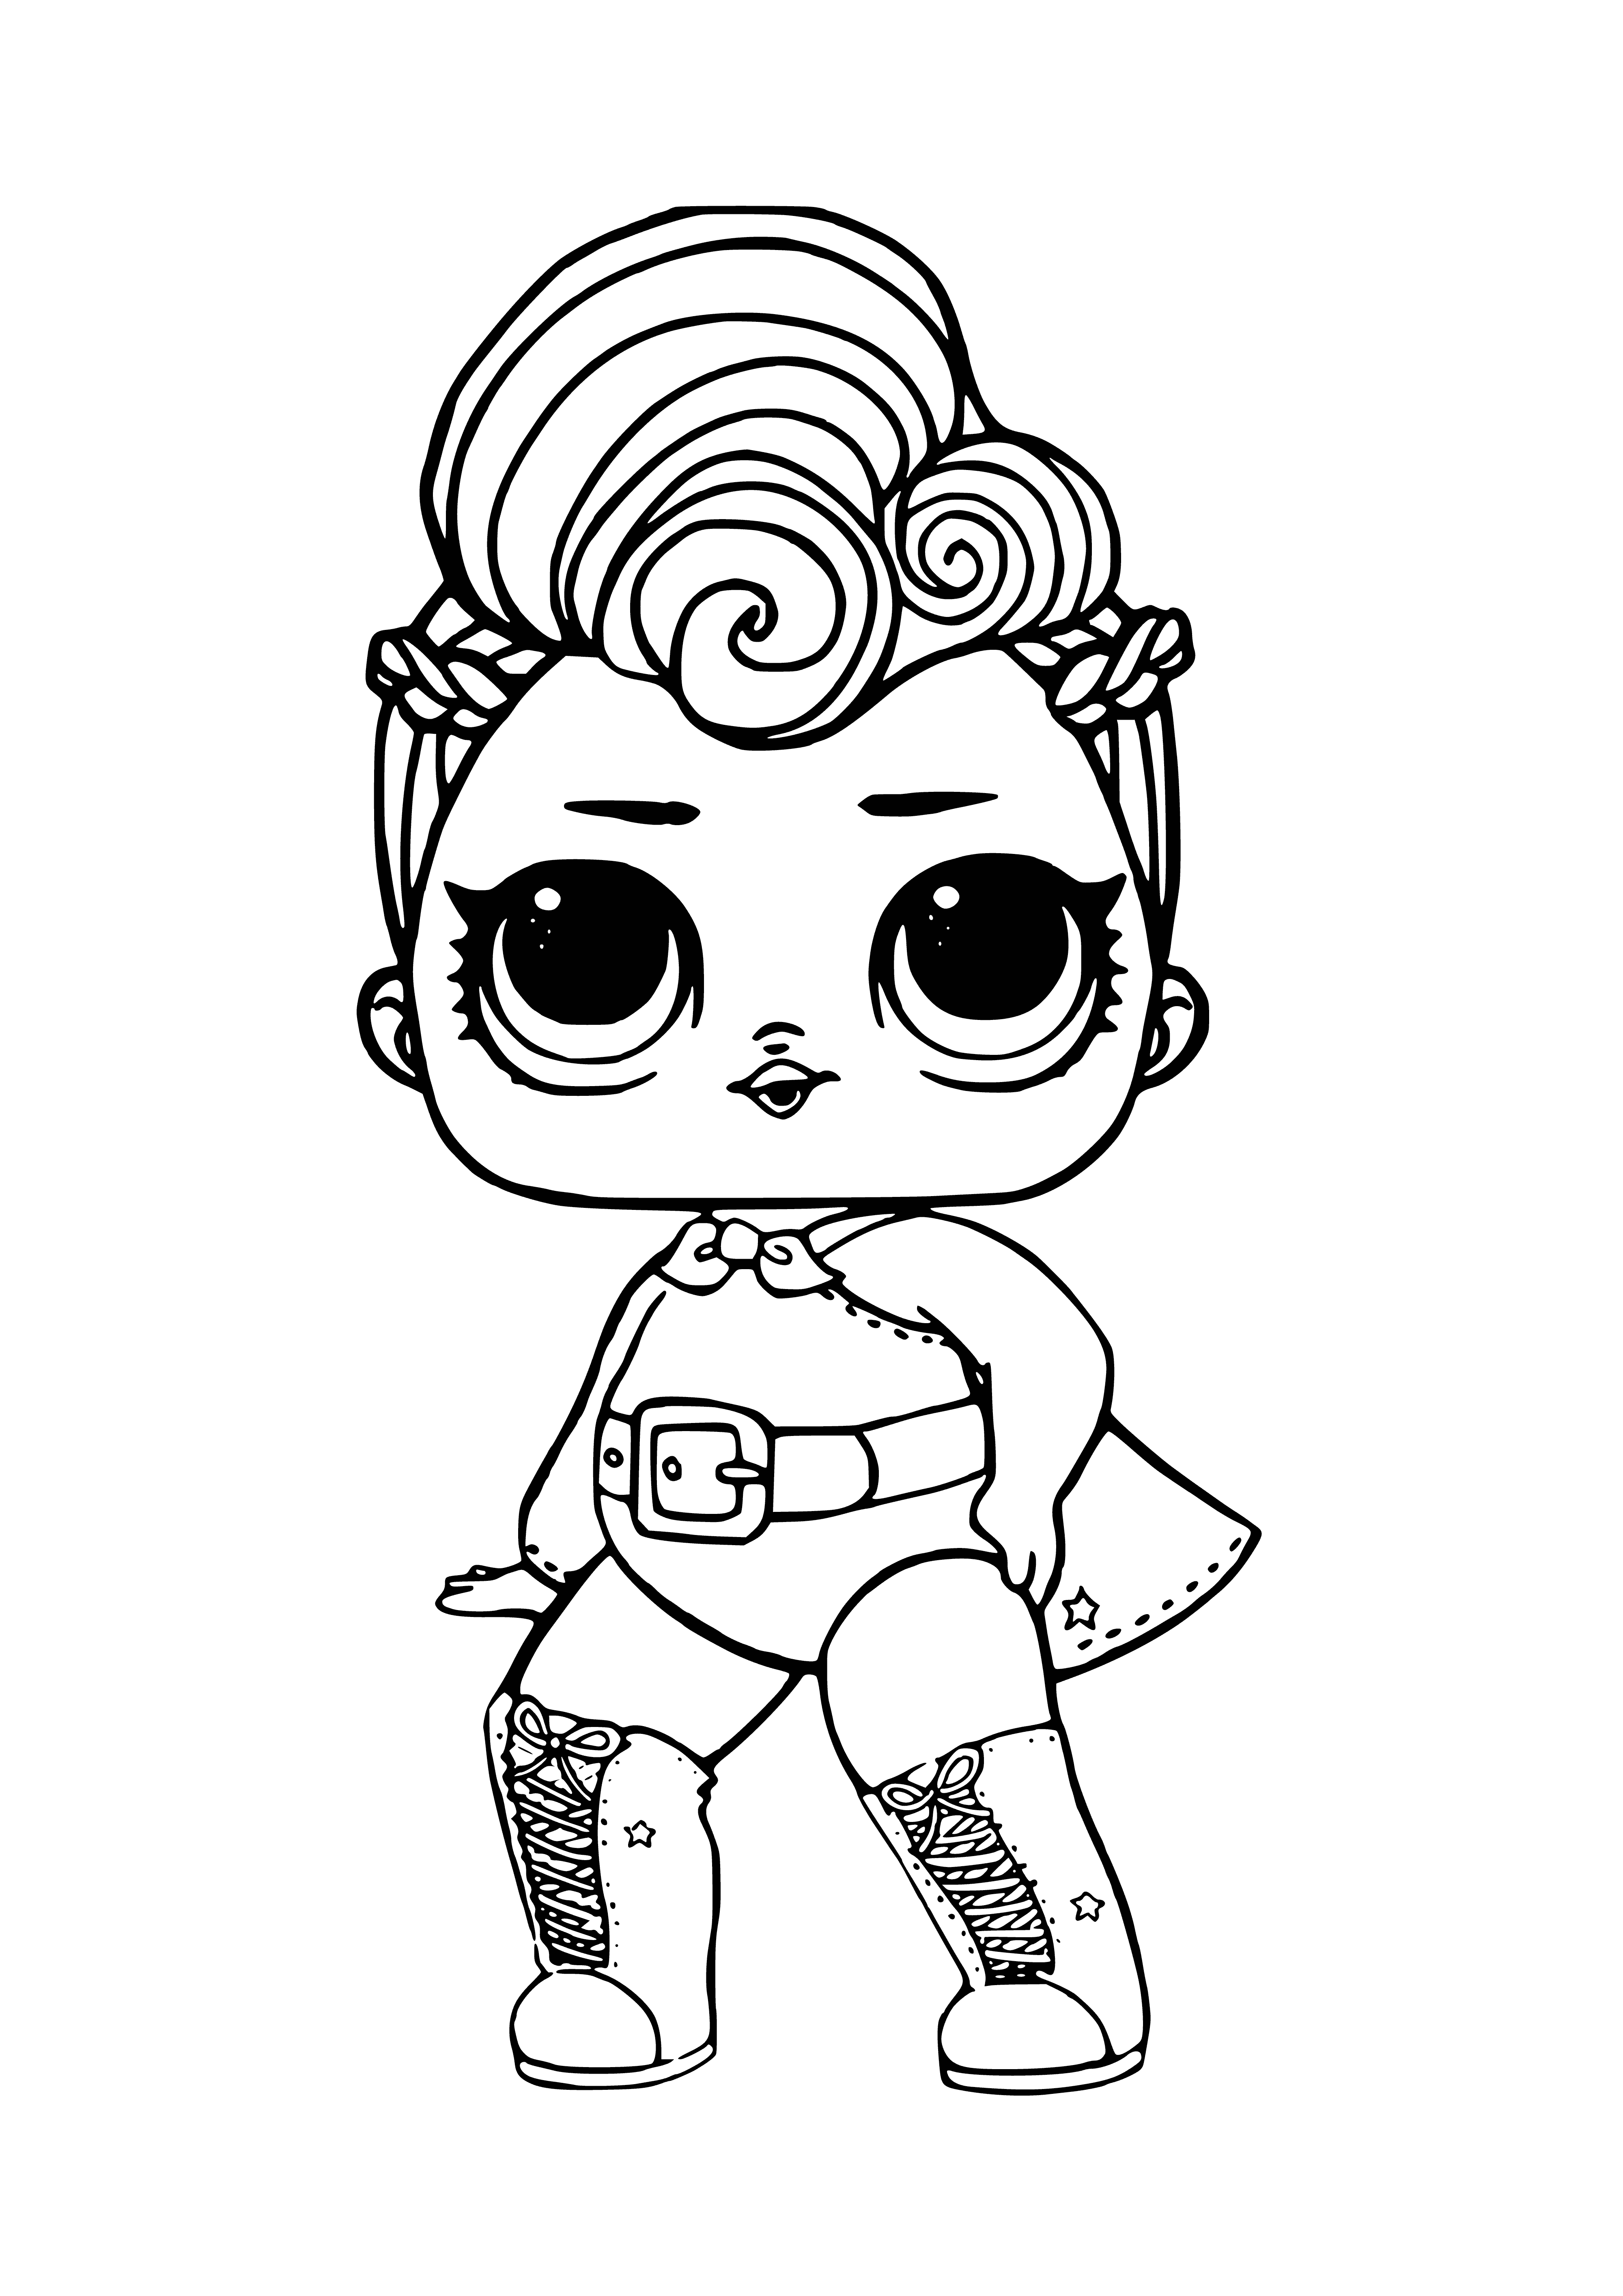 LOL Stardust Queen (Queen Stardust) coloring page